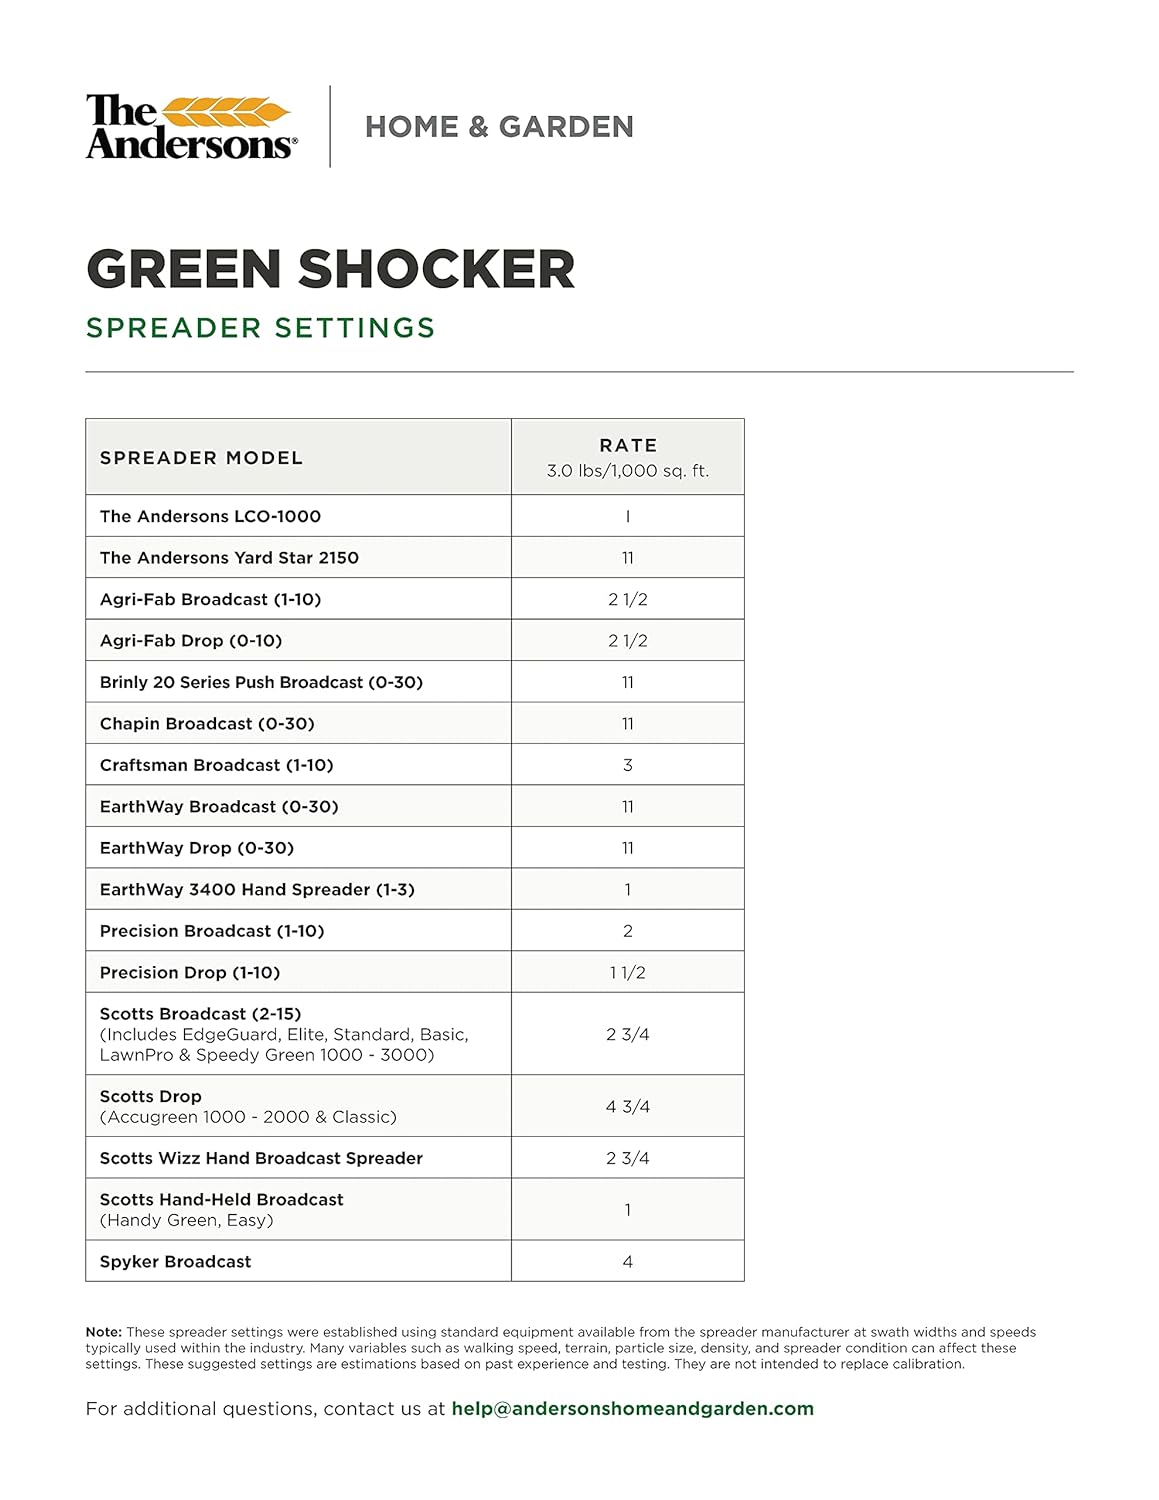 The Andersons Green Shocker 7-1-2 Fertilizer with Humic DG: A Quick Review